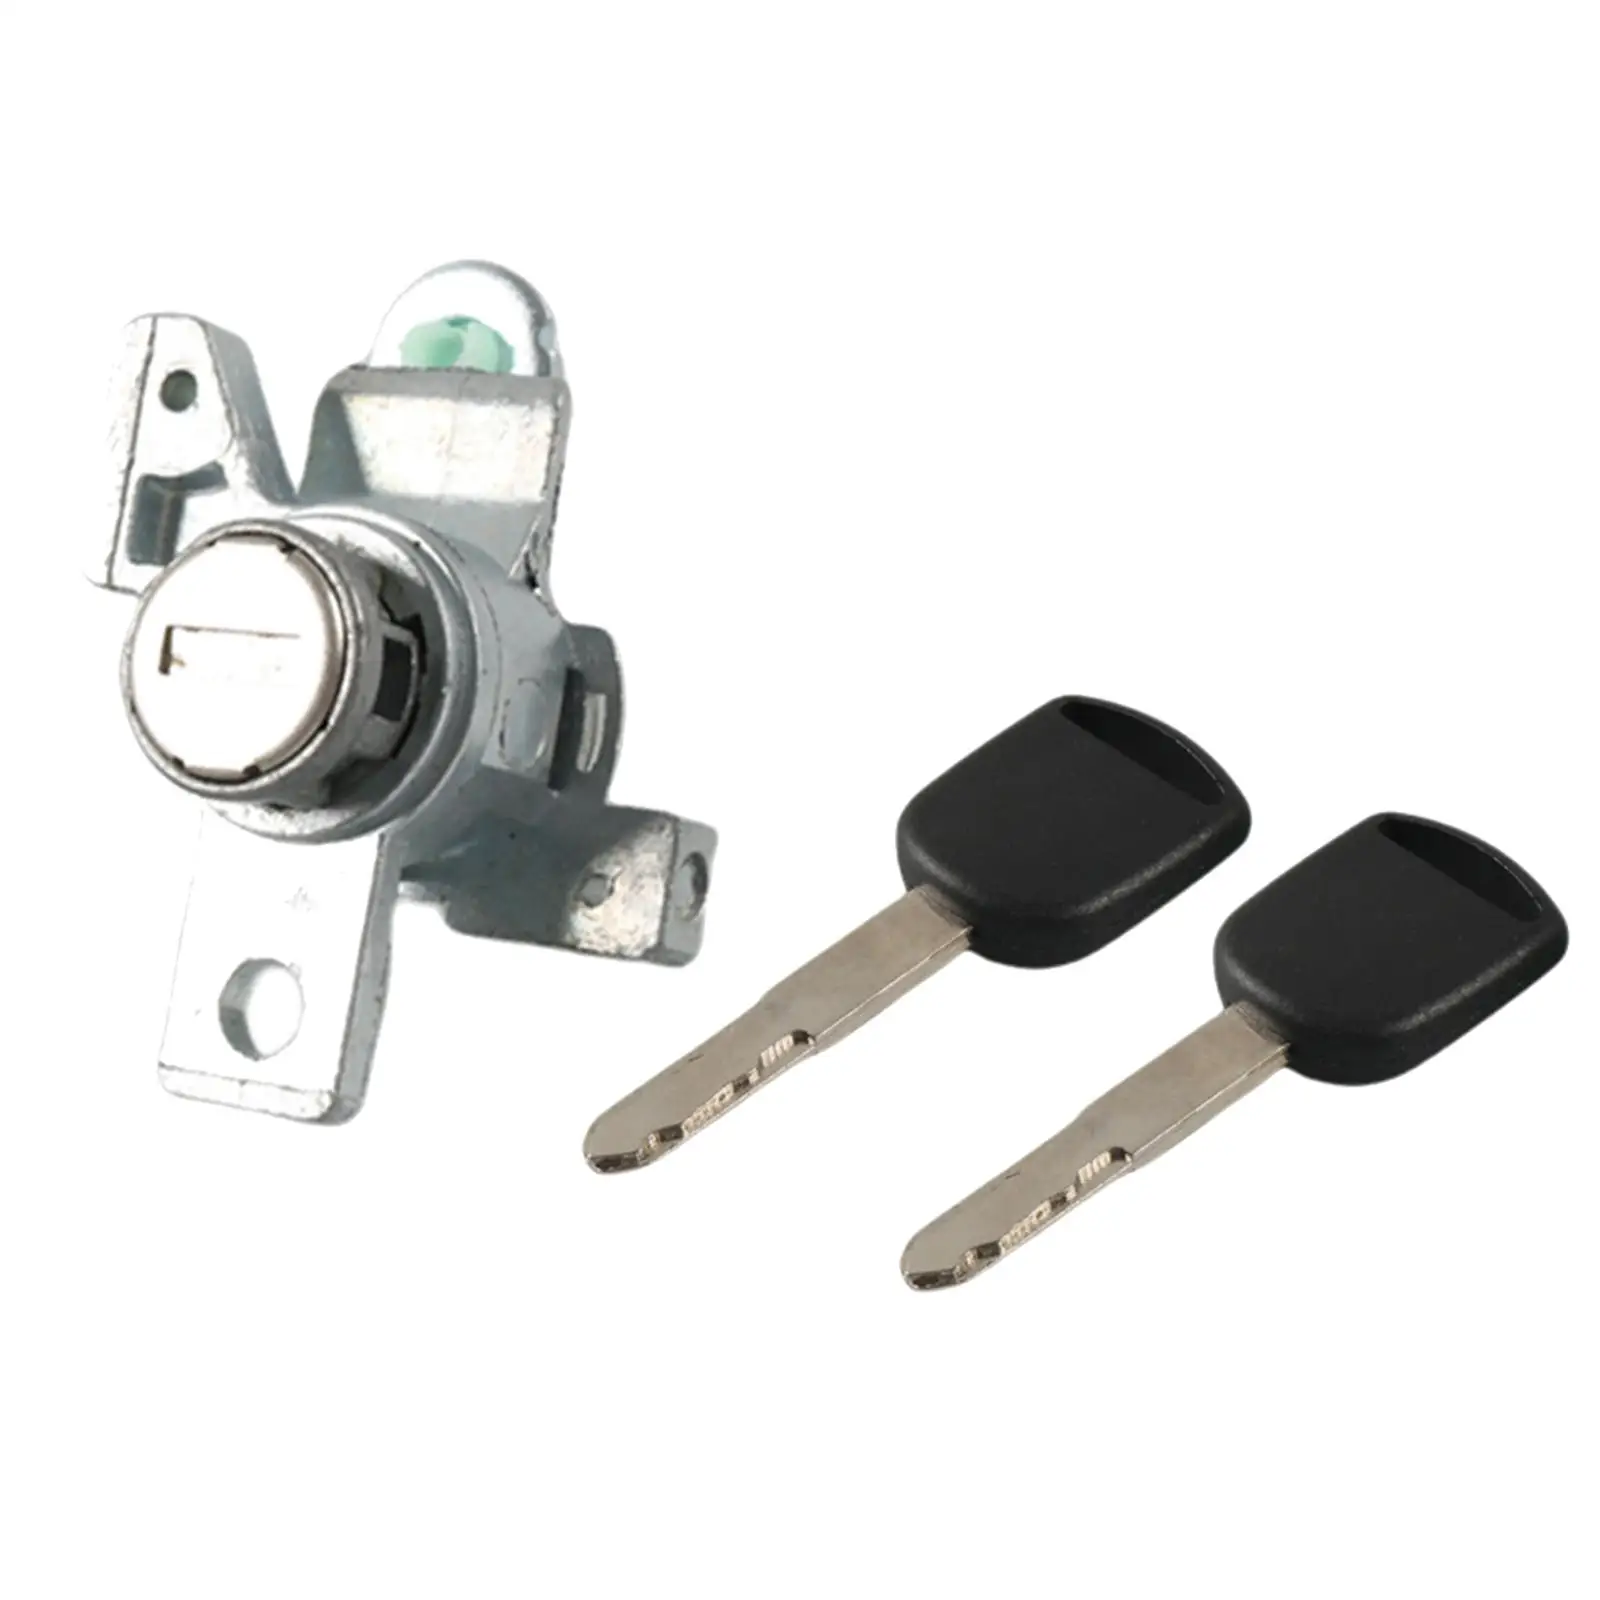 Door Lock Cylinder Set Replace Left Driver Side 72185shja01 with 2 Keys for Honda Odyssey 05-10 High Quality Accessories